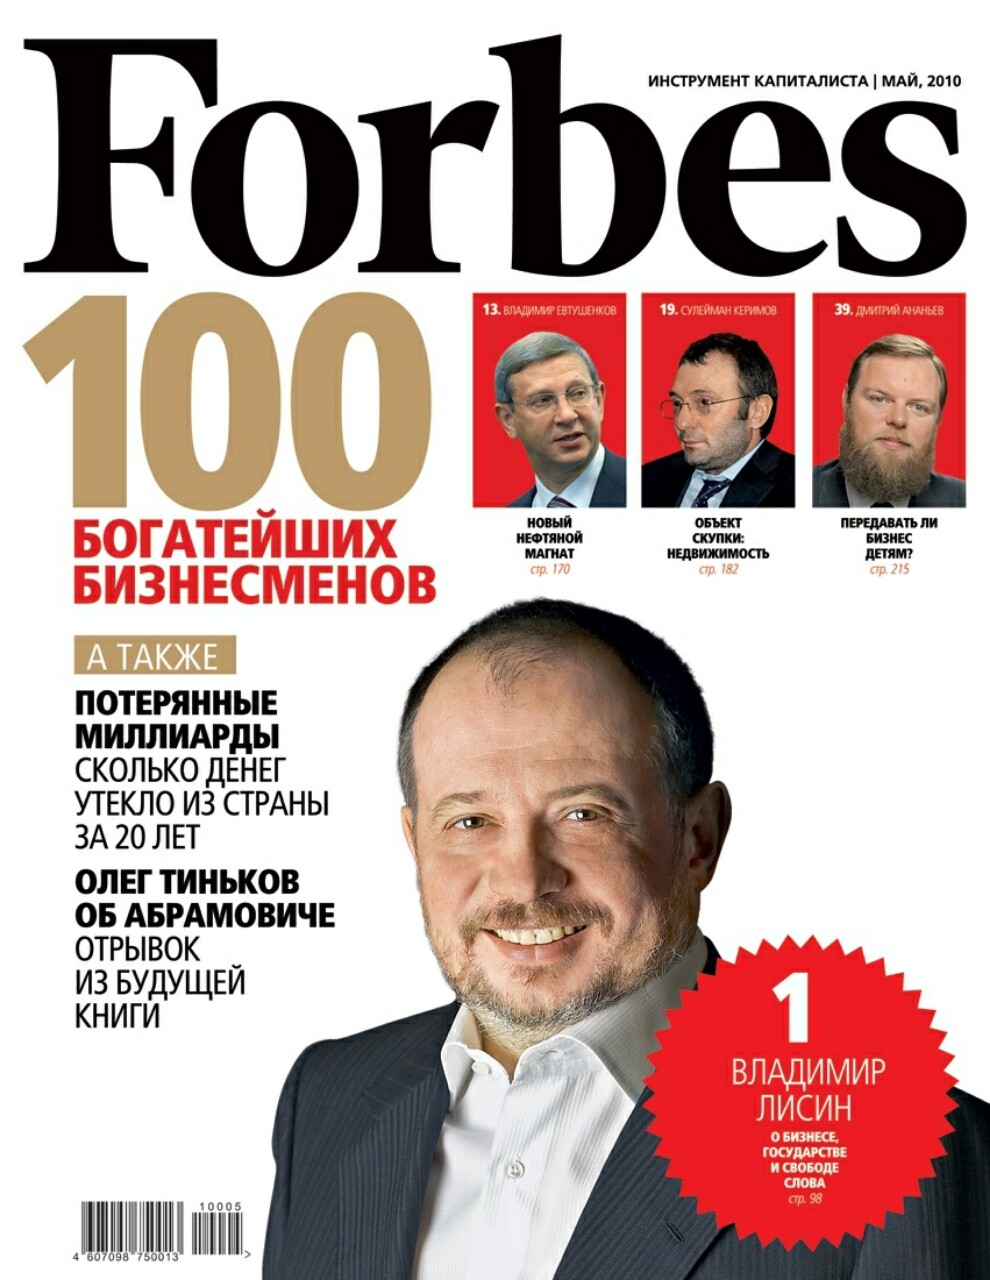 Lists journal. Журнал Forbes. Обложка форбс. Обложка журнала Forbes. Forbes самые богатые люди обложка.